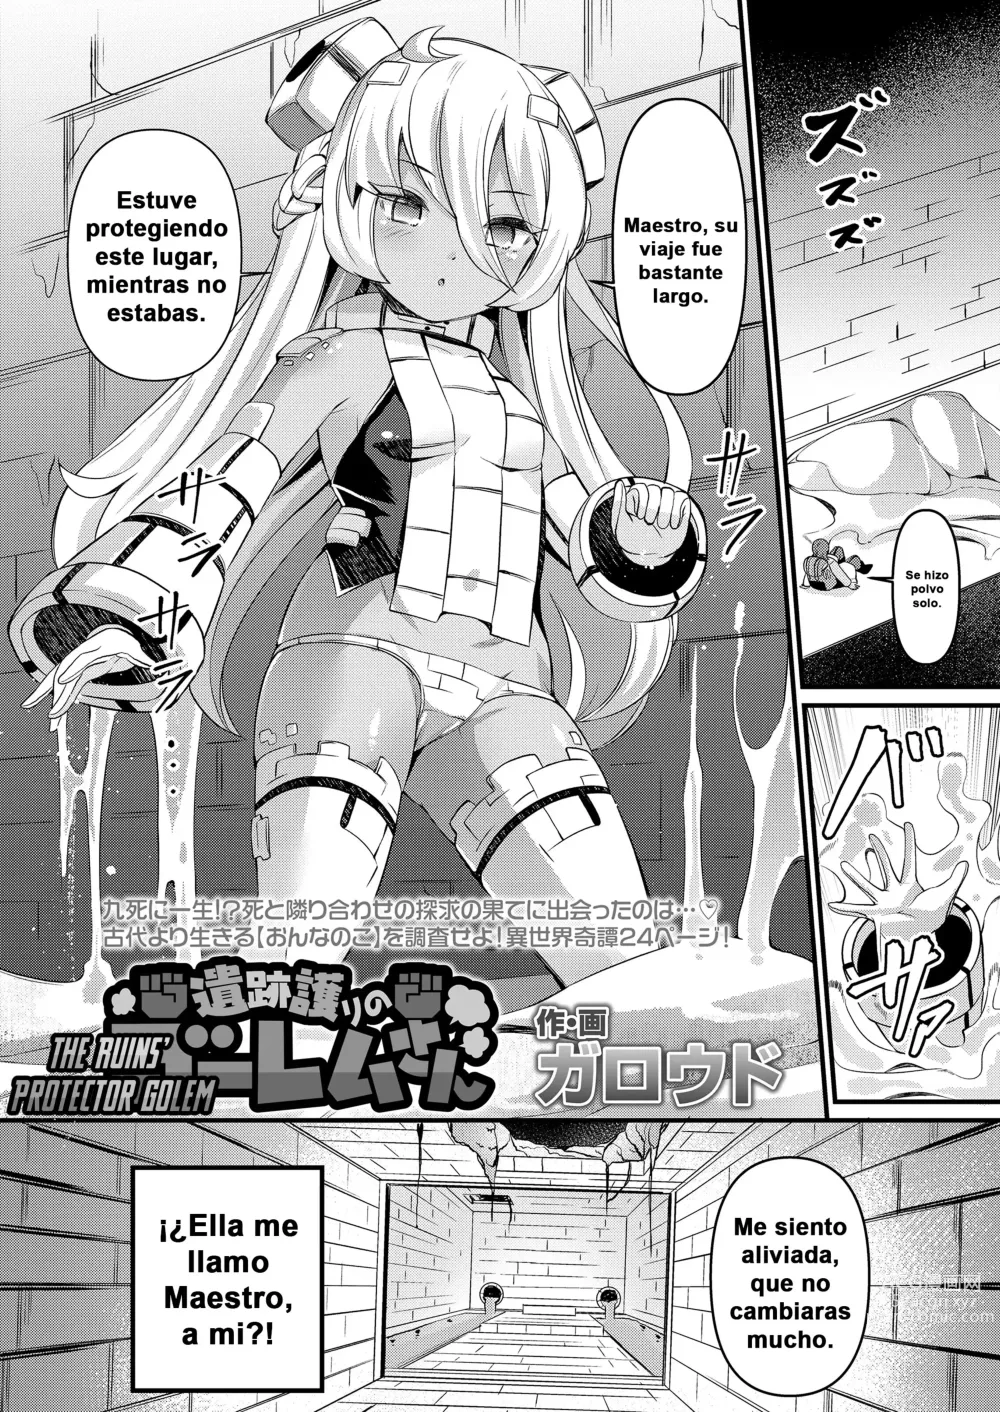 Page 2 of manga The Ruins' Protector Golem